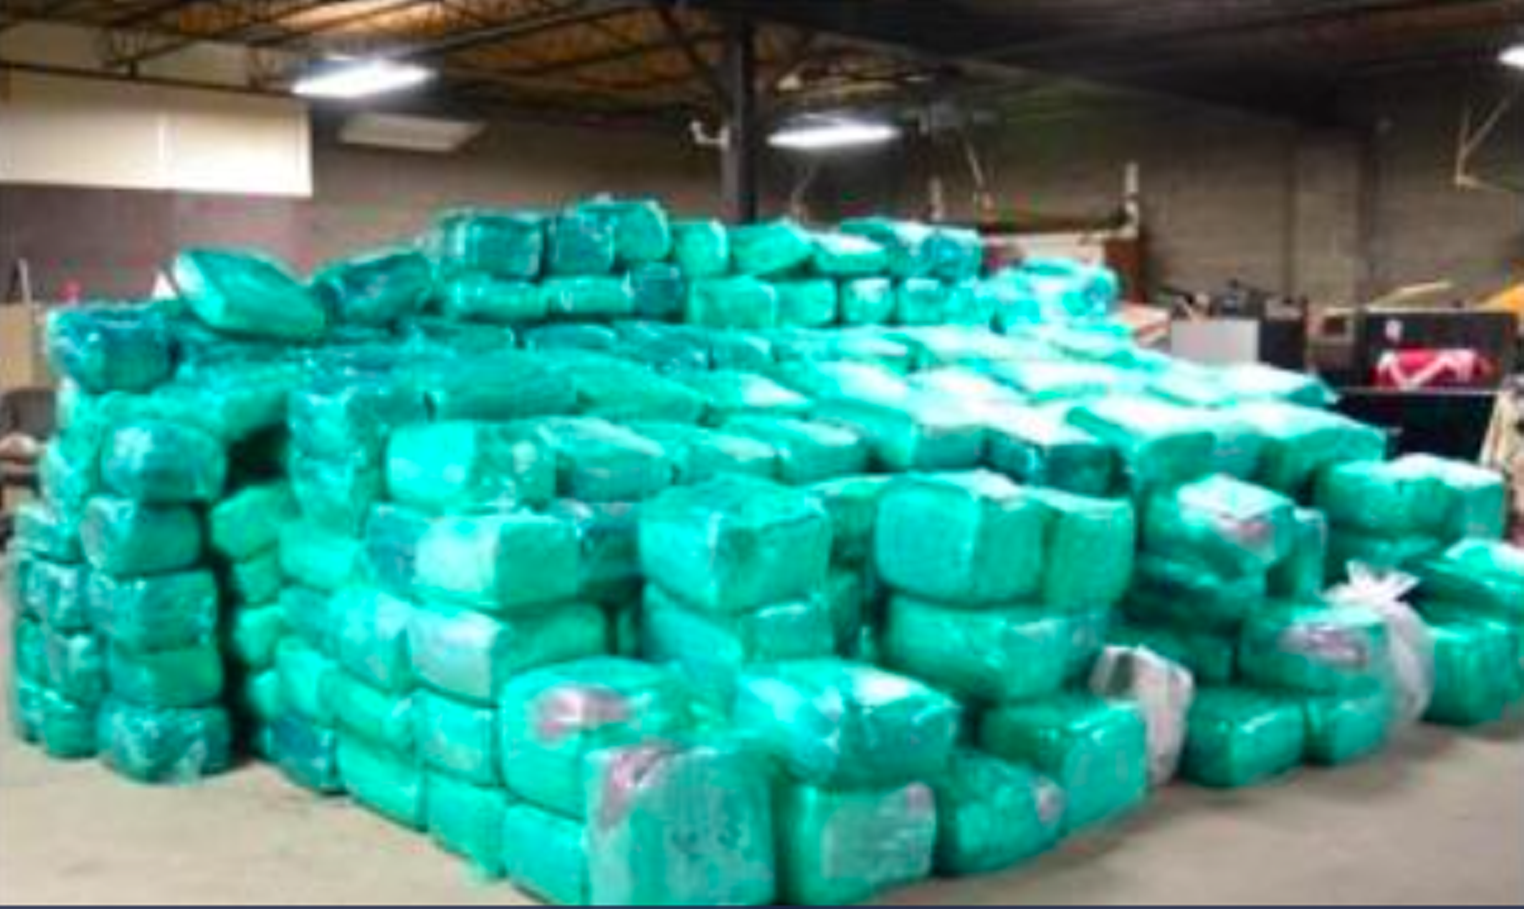 10000 pounds of weed